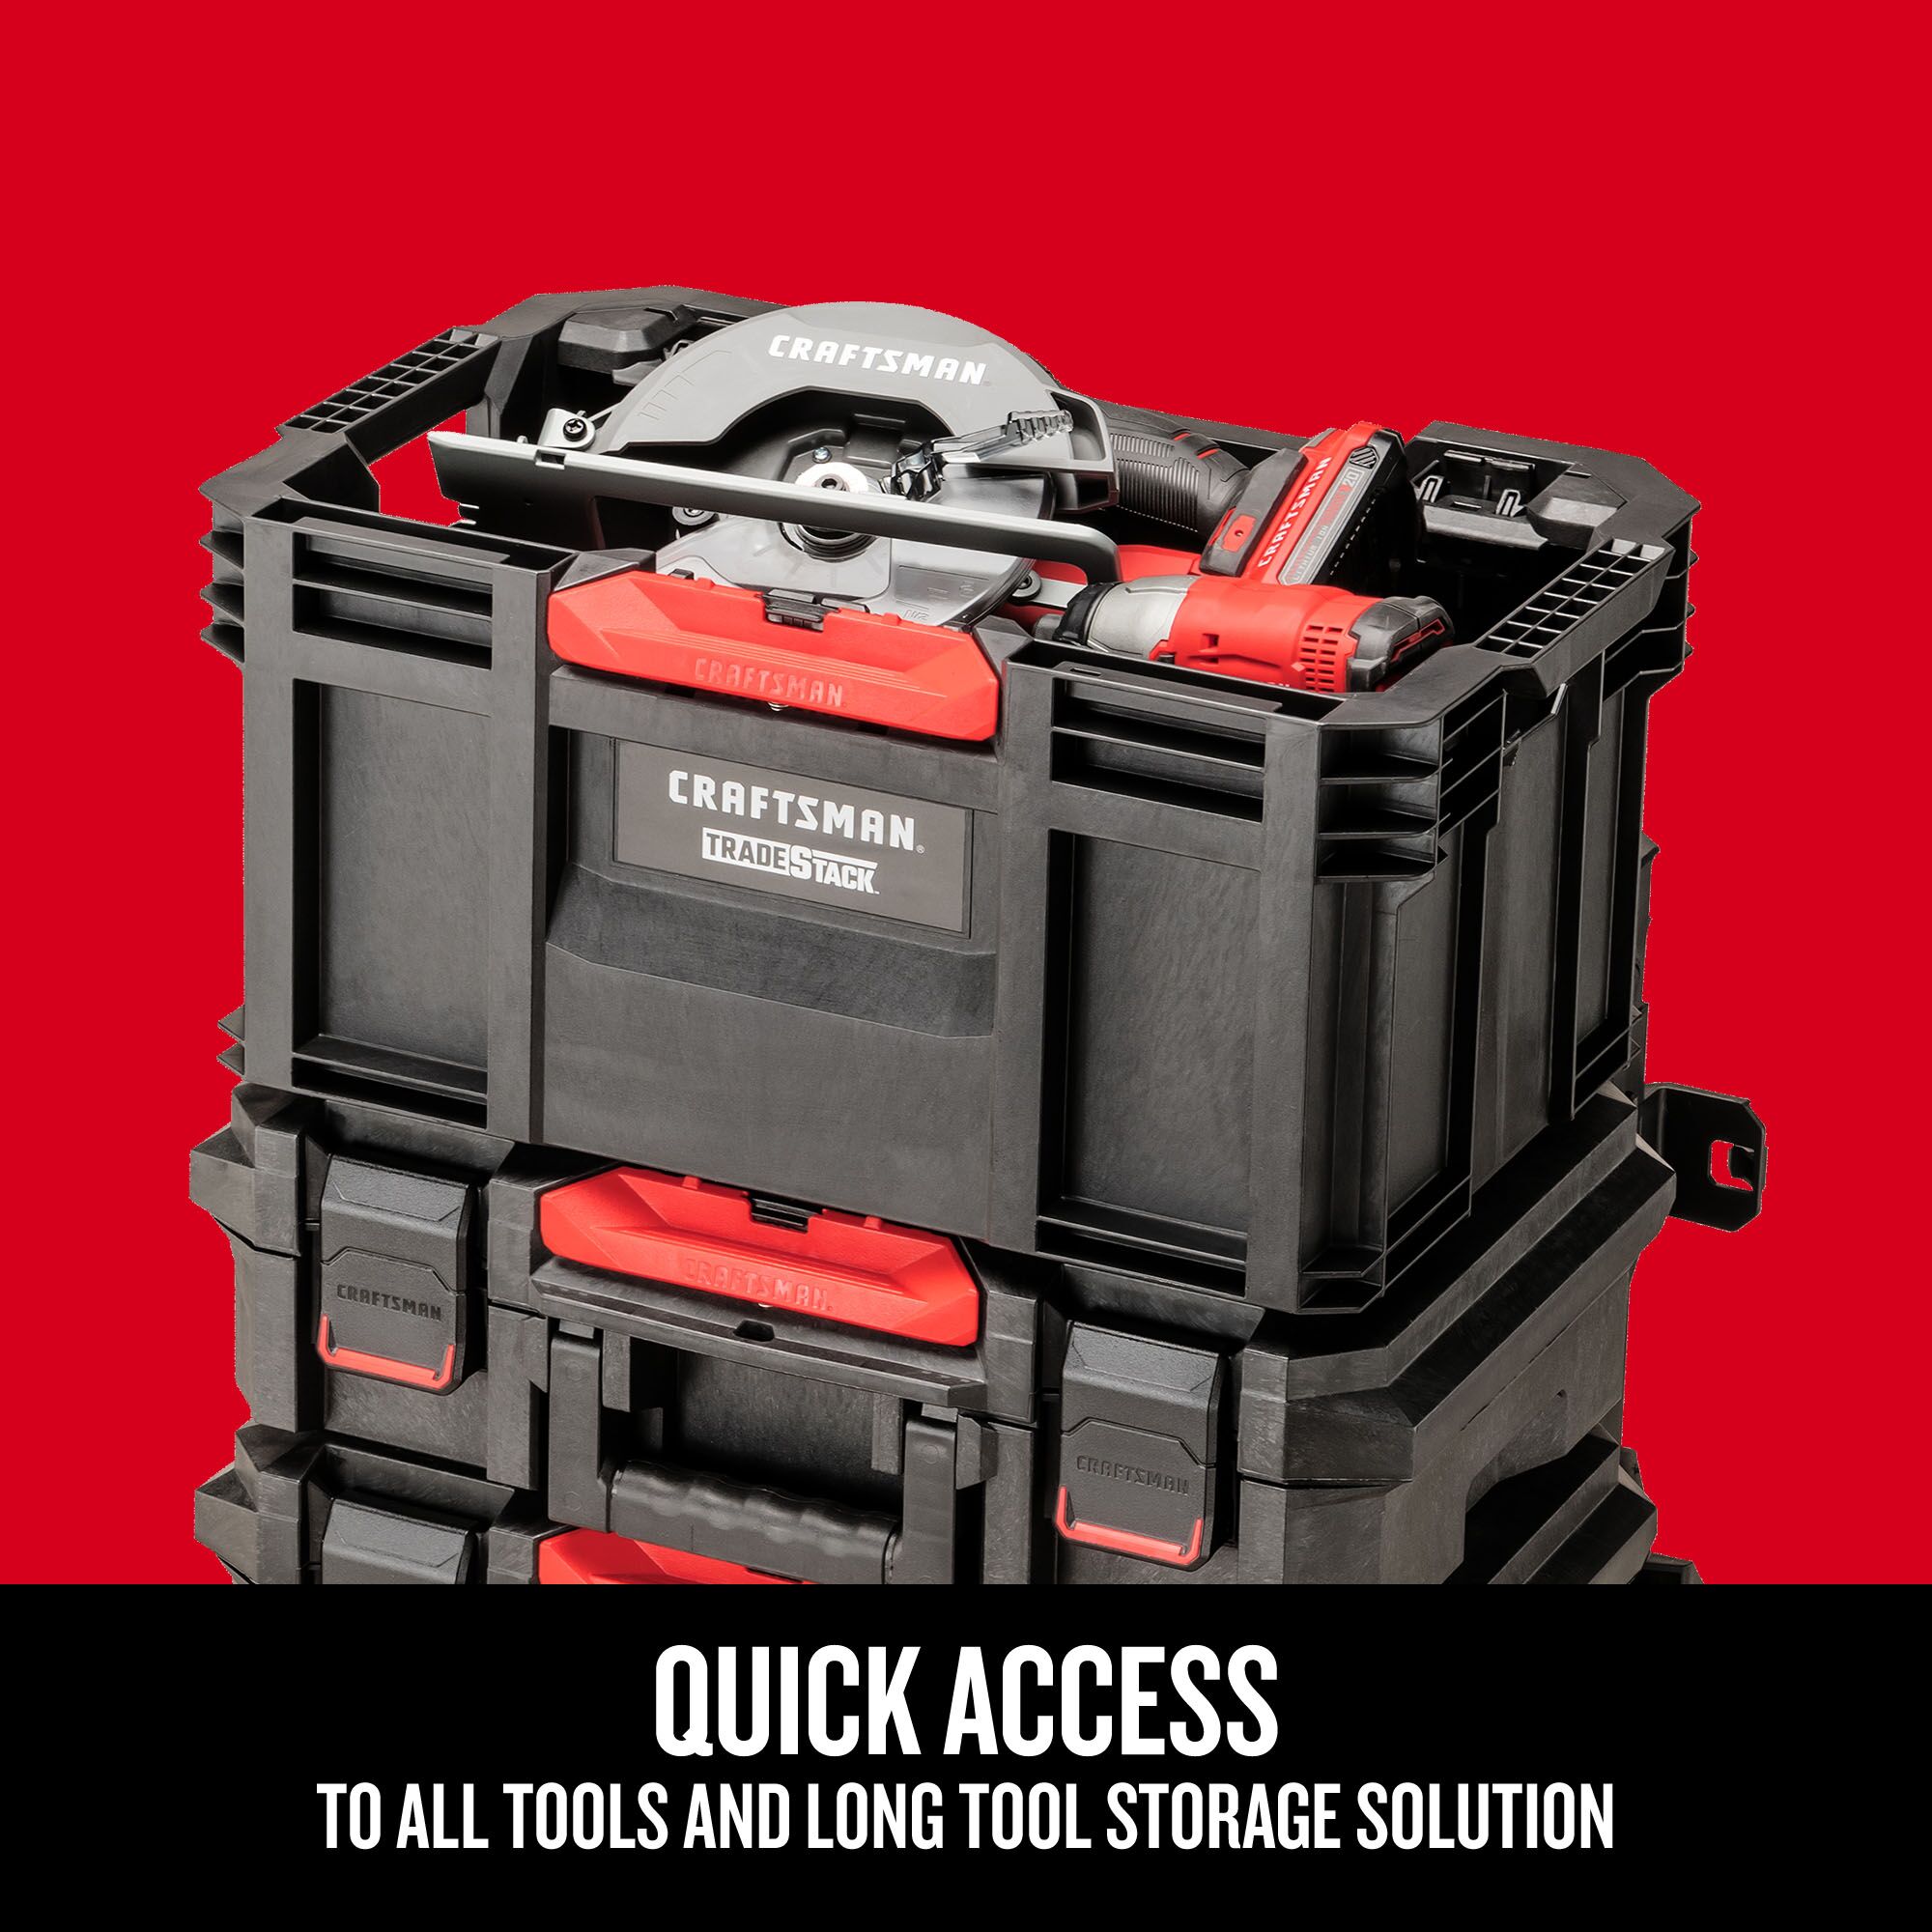 Quick Access to all tools and long tool storage solution